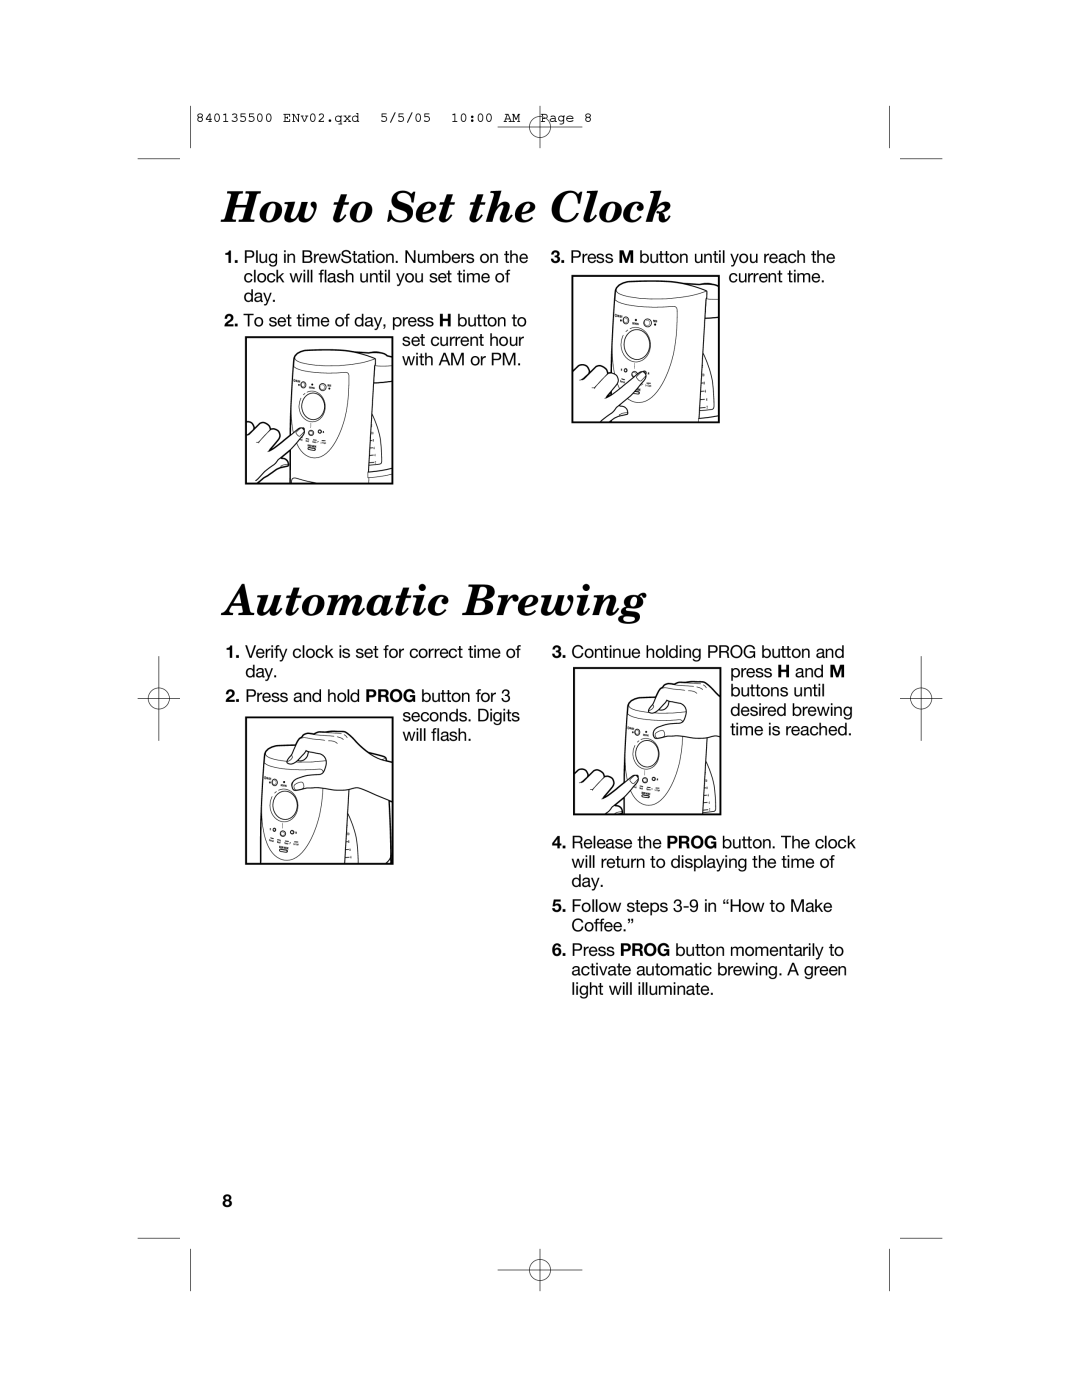 Hamilton Beach 47451 manual How to Set the Clock, Automatic Brewing 